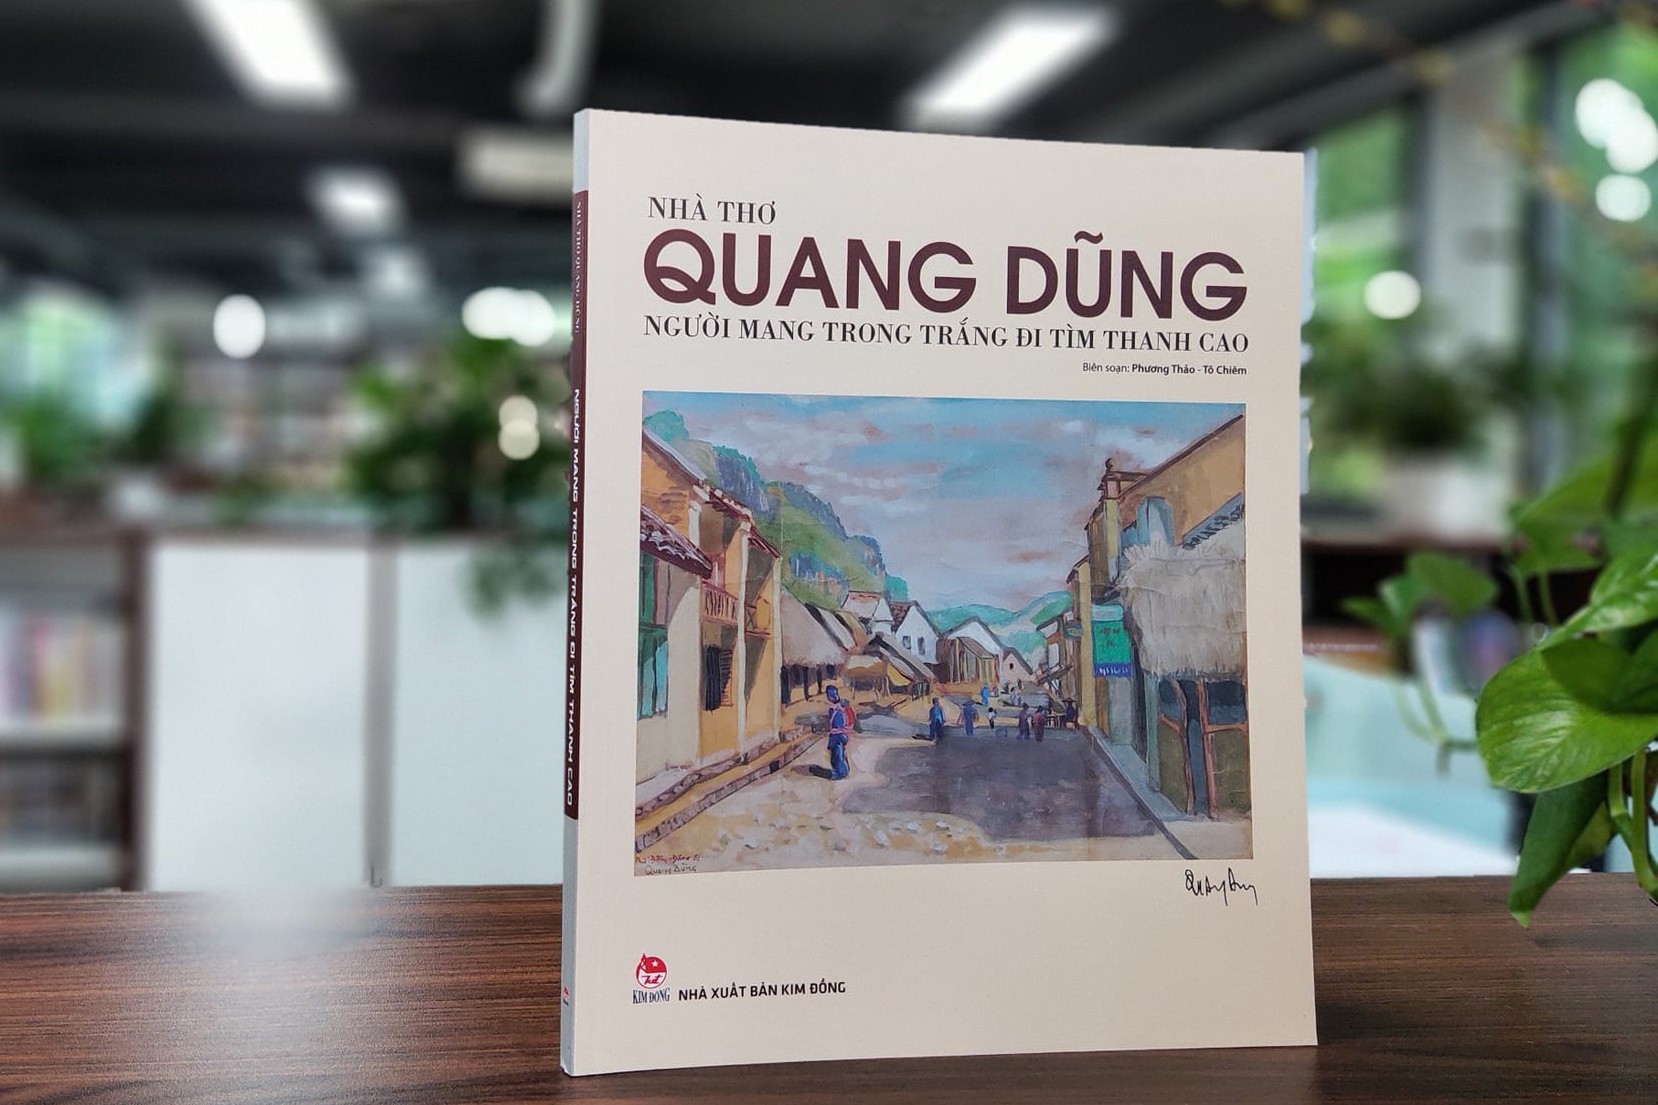 Su nghiep Quang Dung anh 3